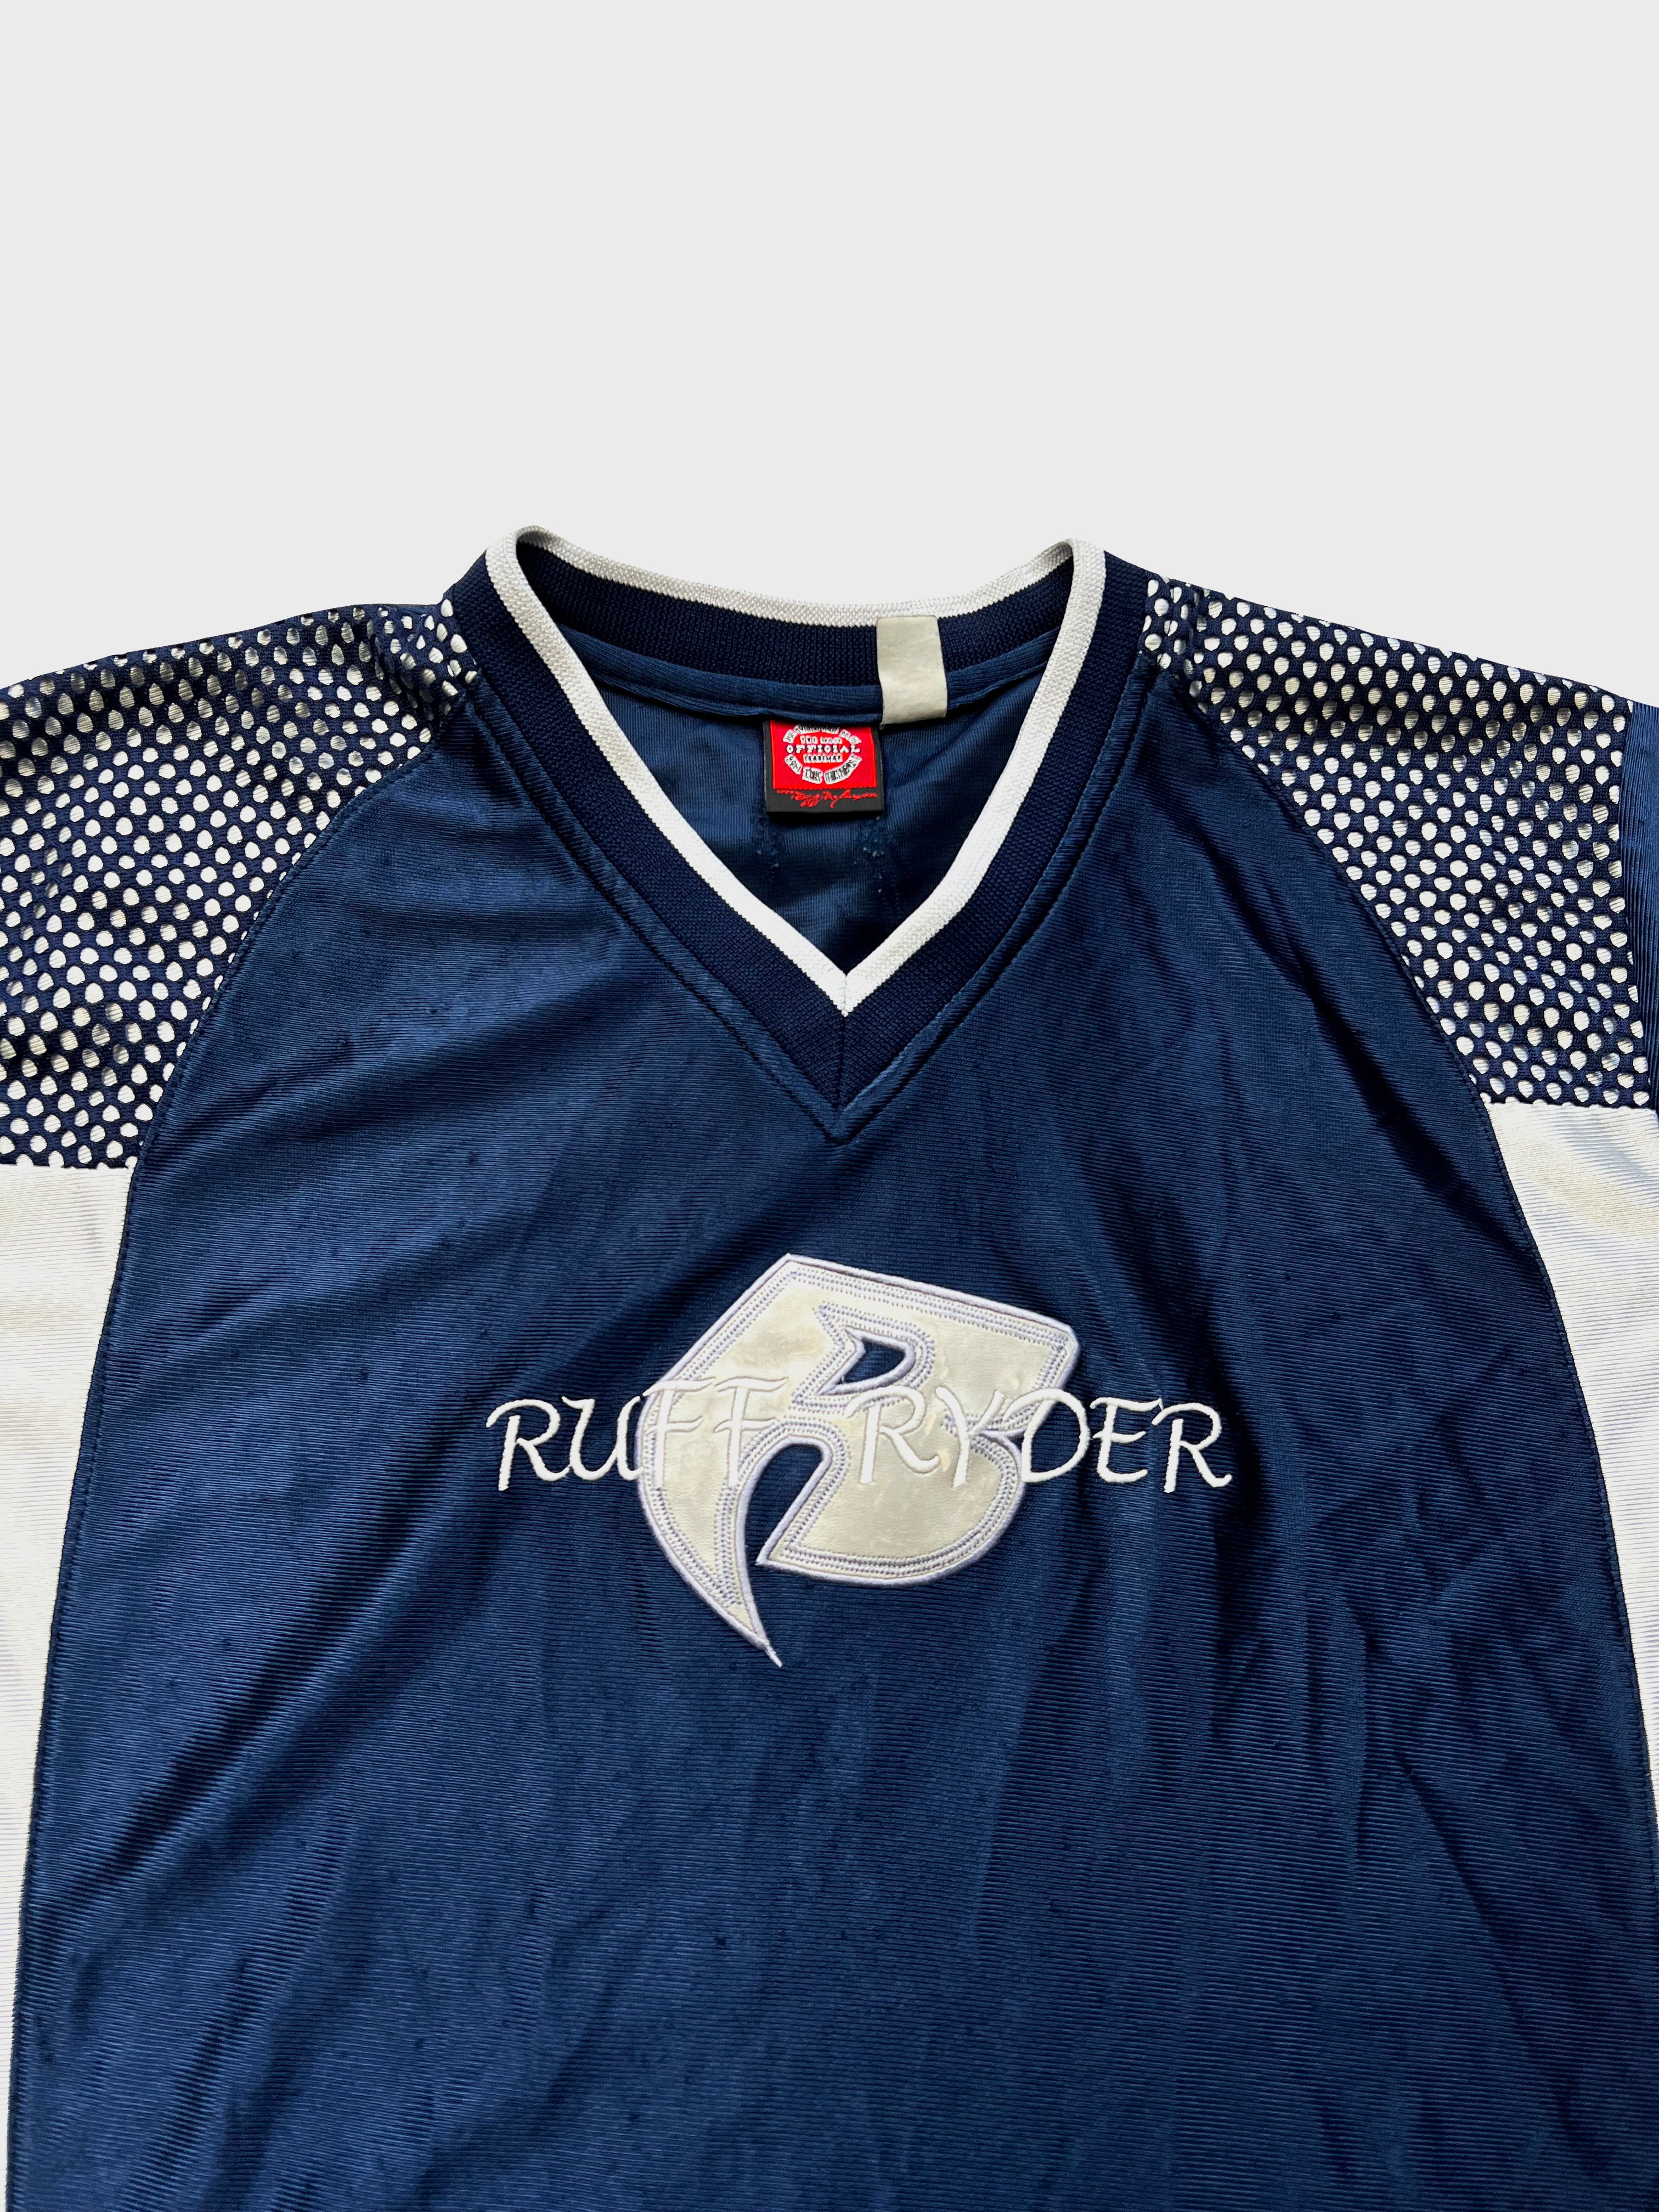 Ruff Ryders Navy/Silver Jersey 90's